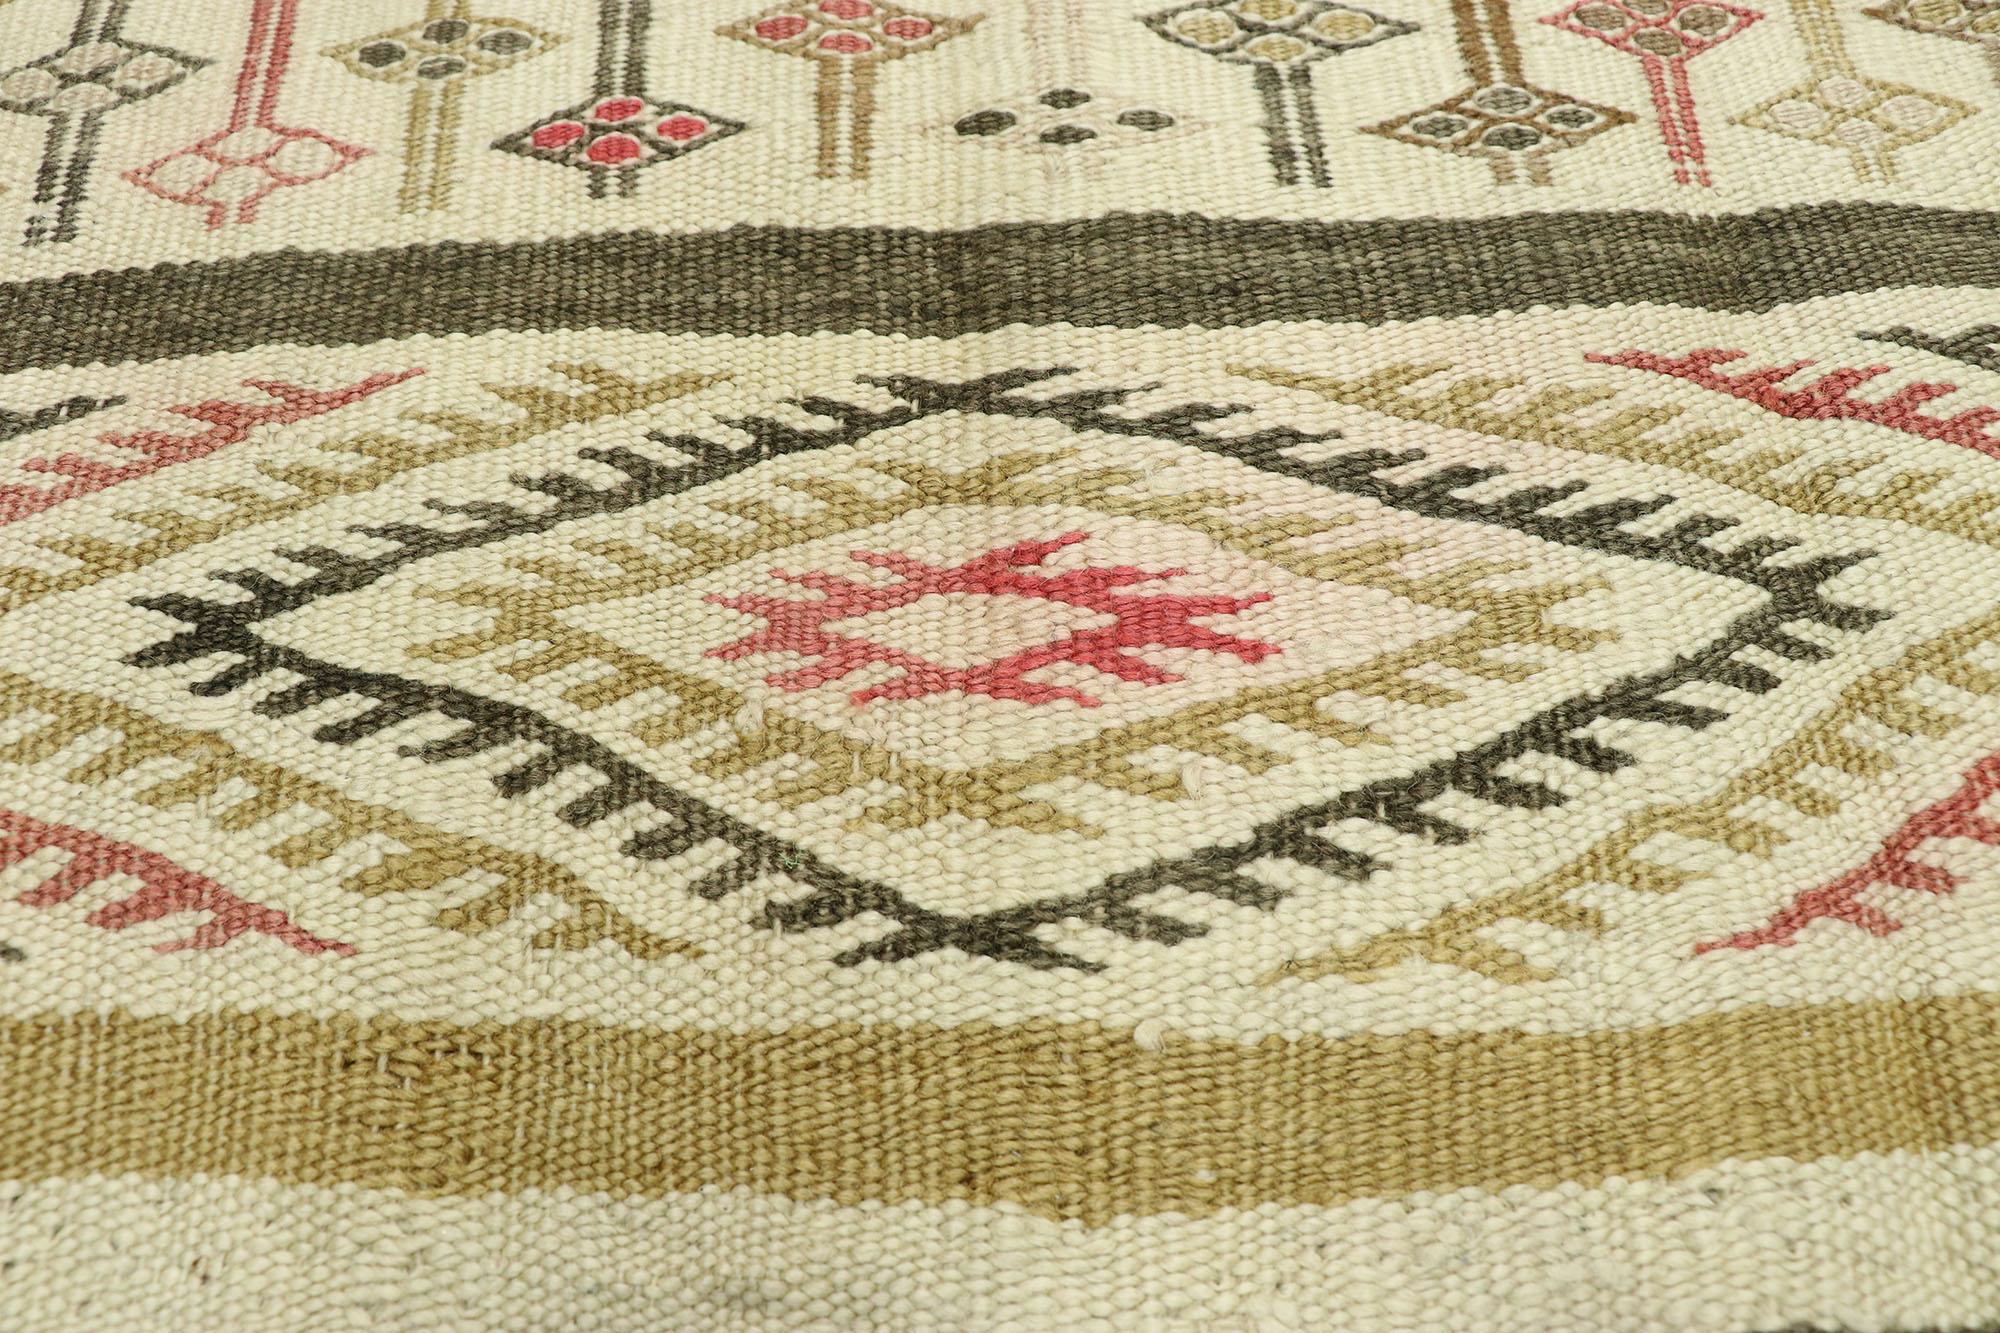 Hand-Woven Vintage Turkish Kilim Rug with Rustic Lodge Style and Modern Tribal Vibes For Sale